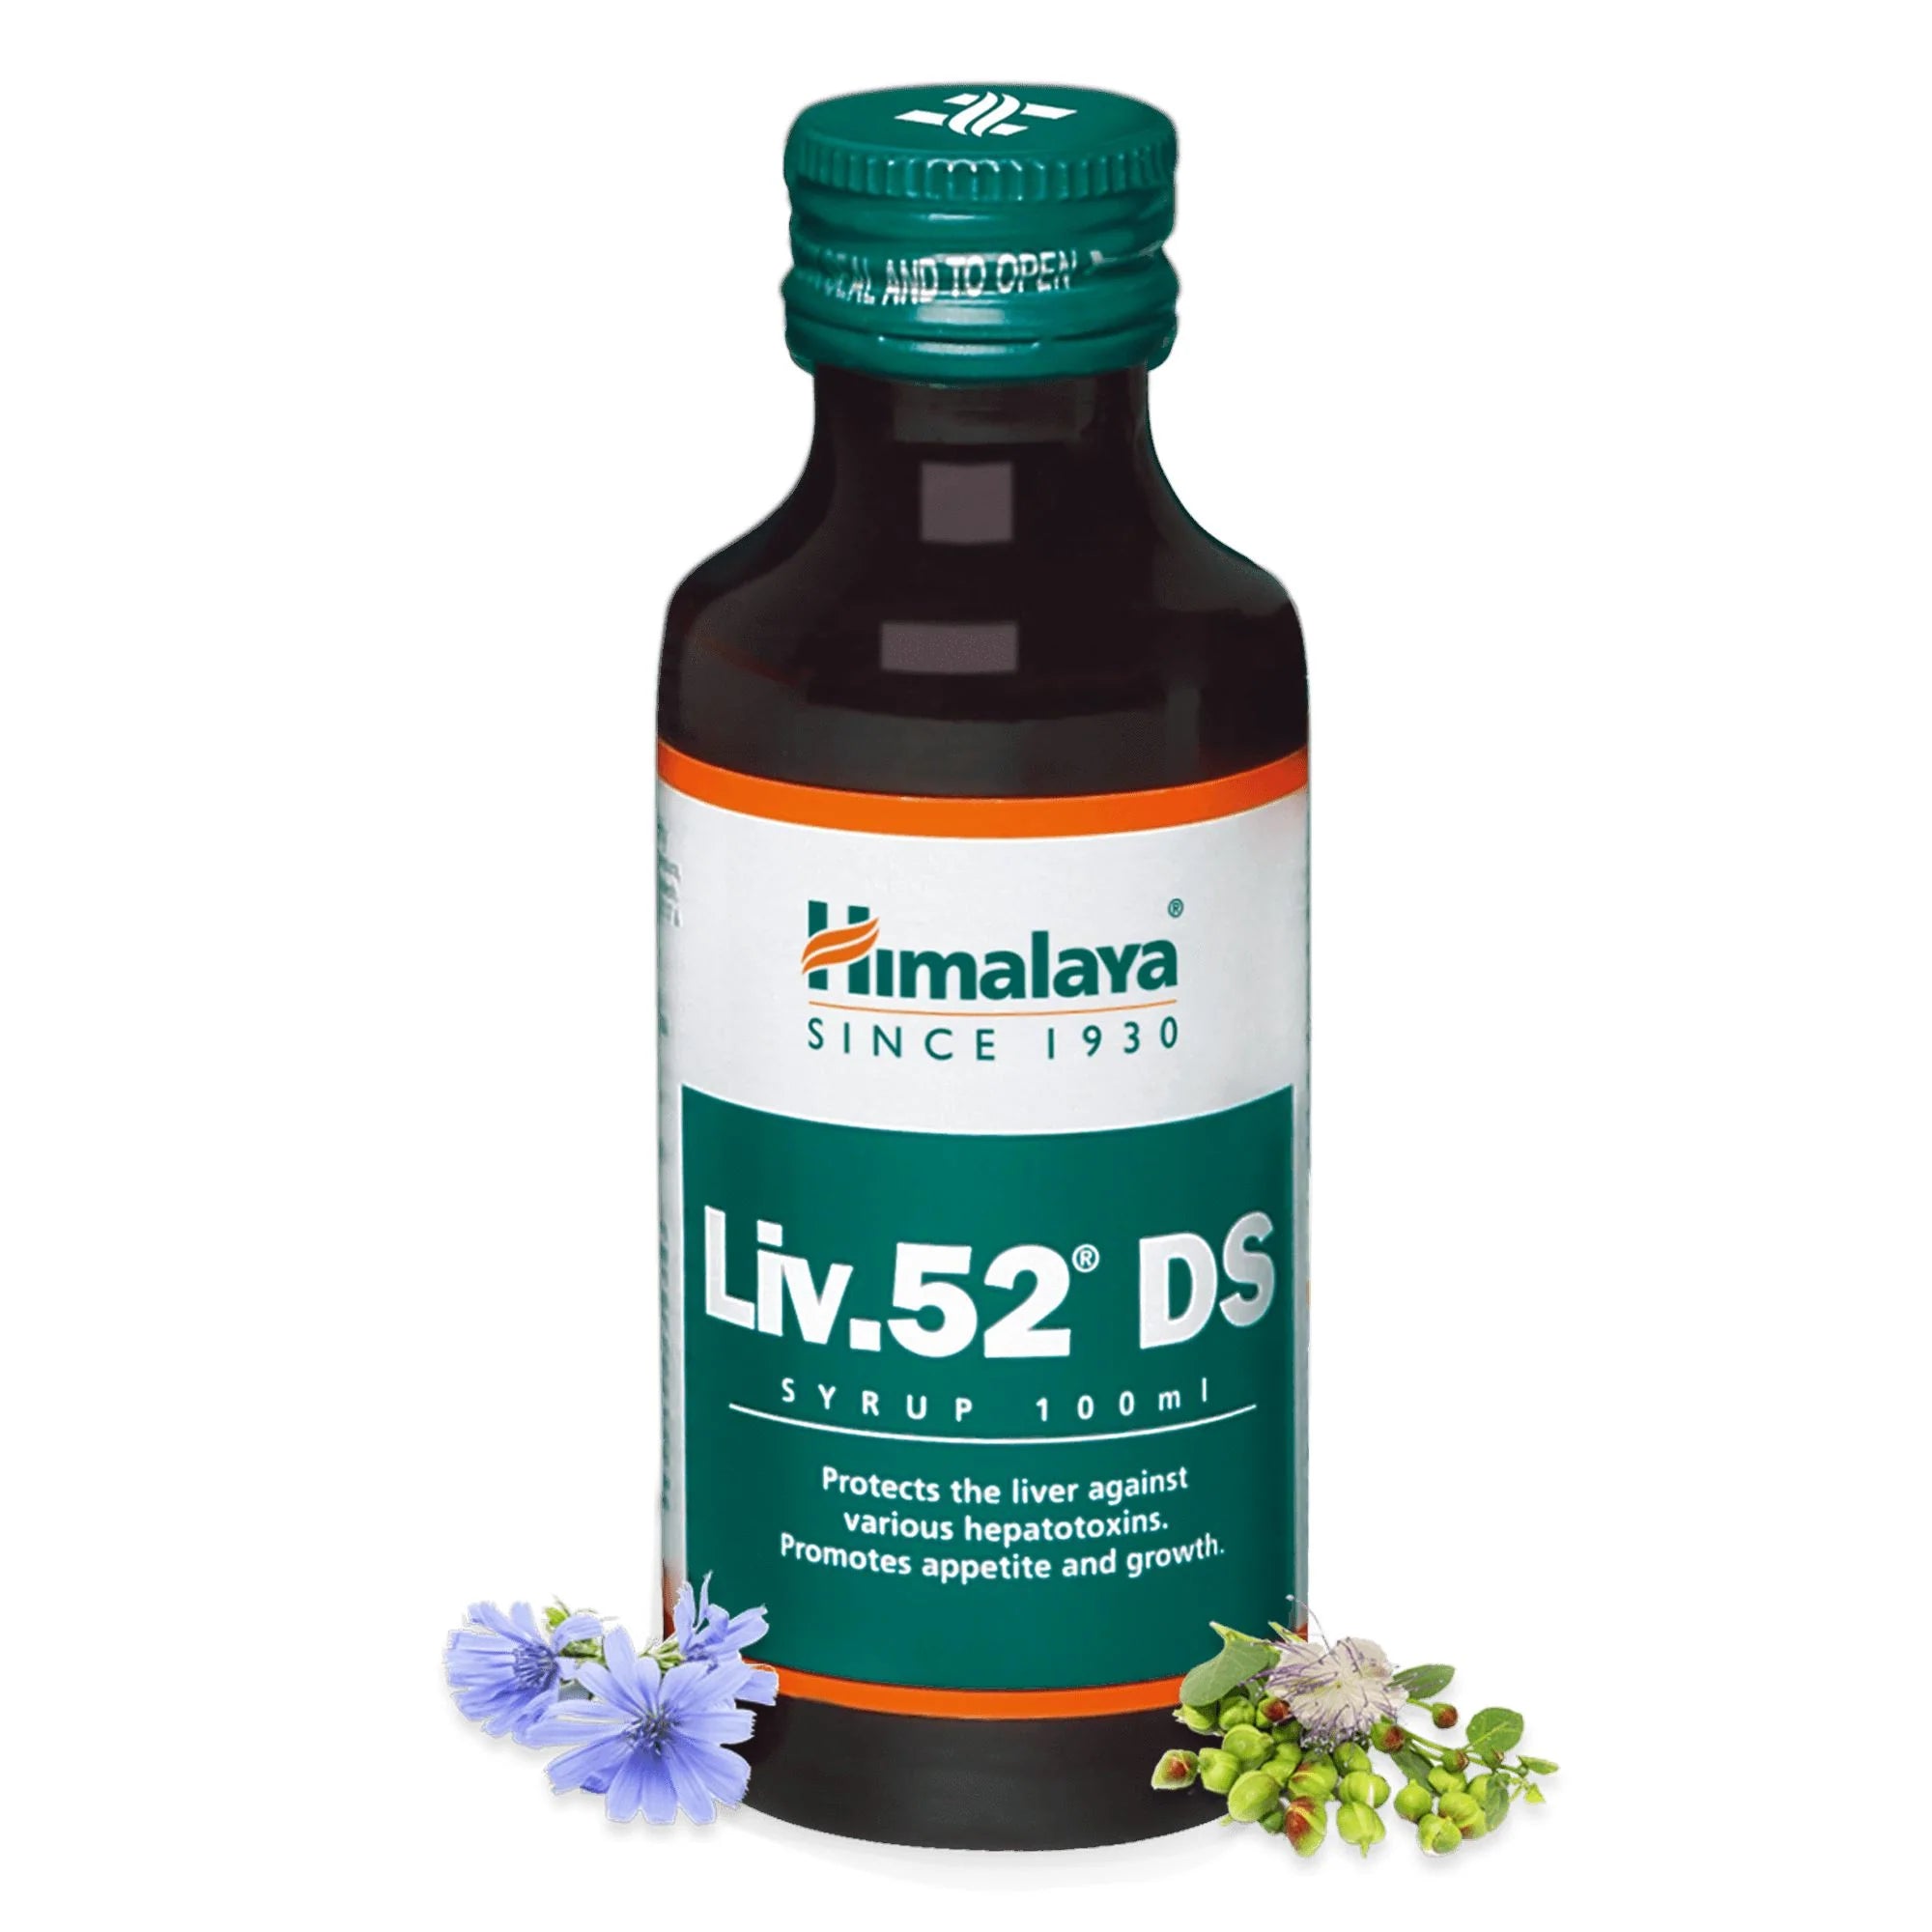 Liv-52 DS Syrup 100ml